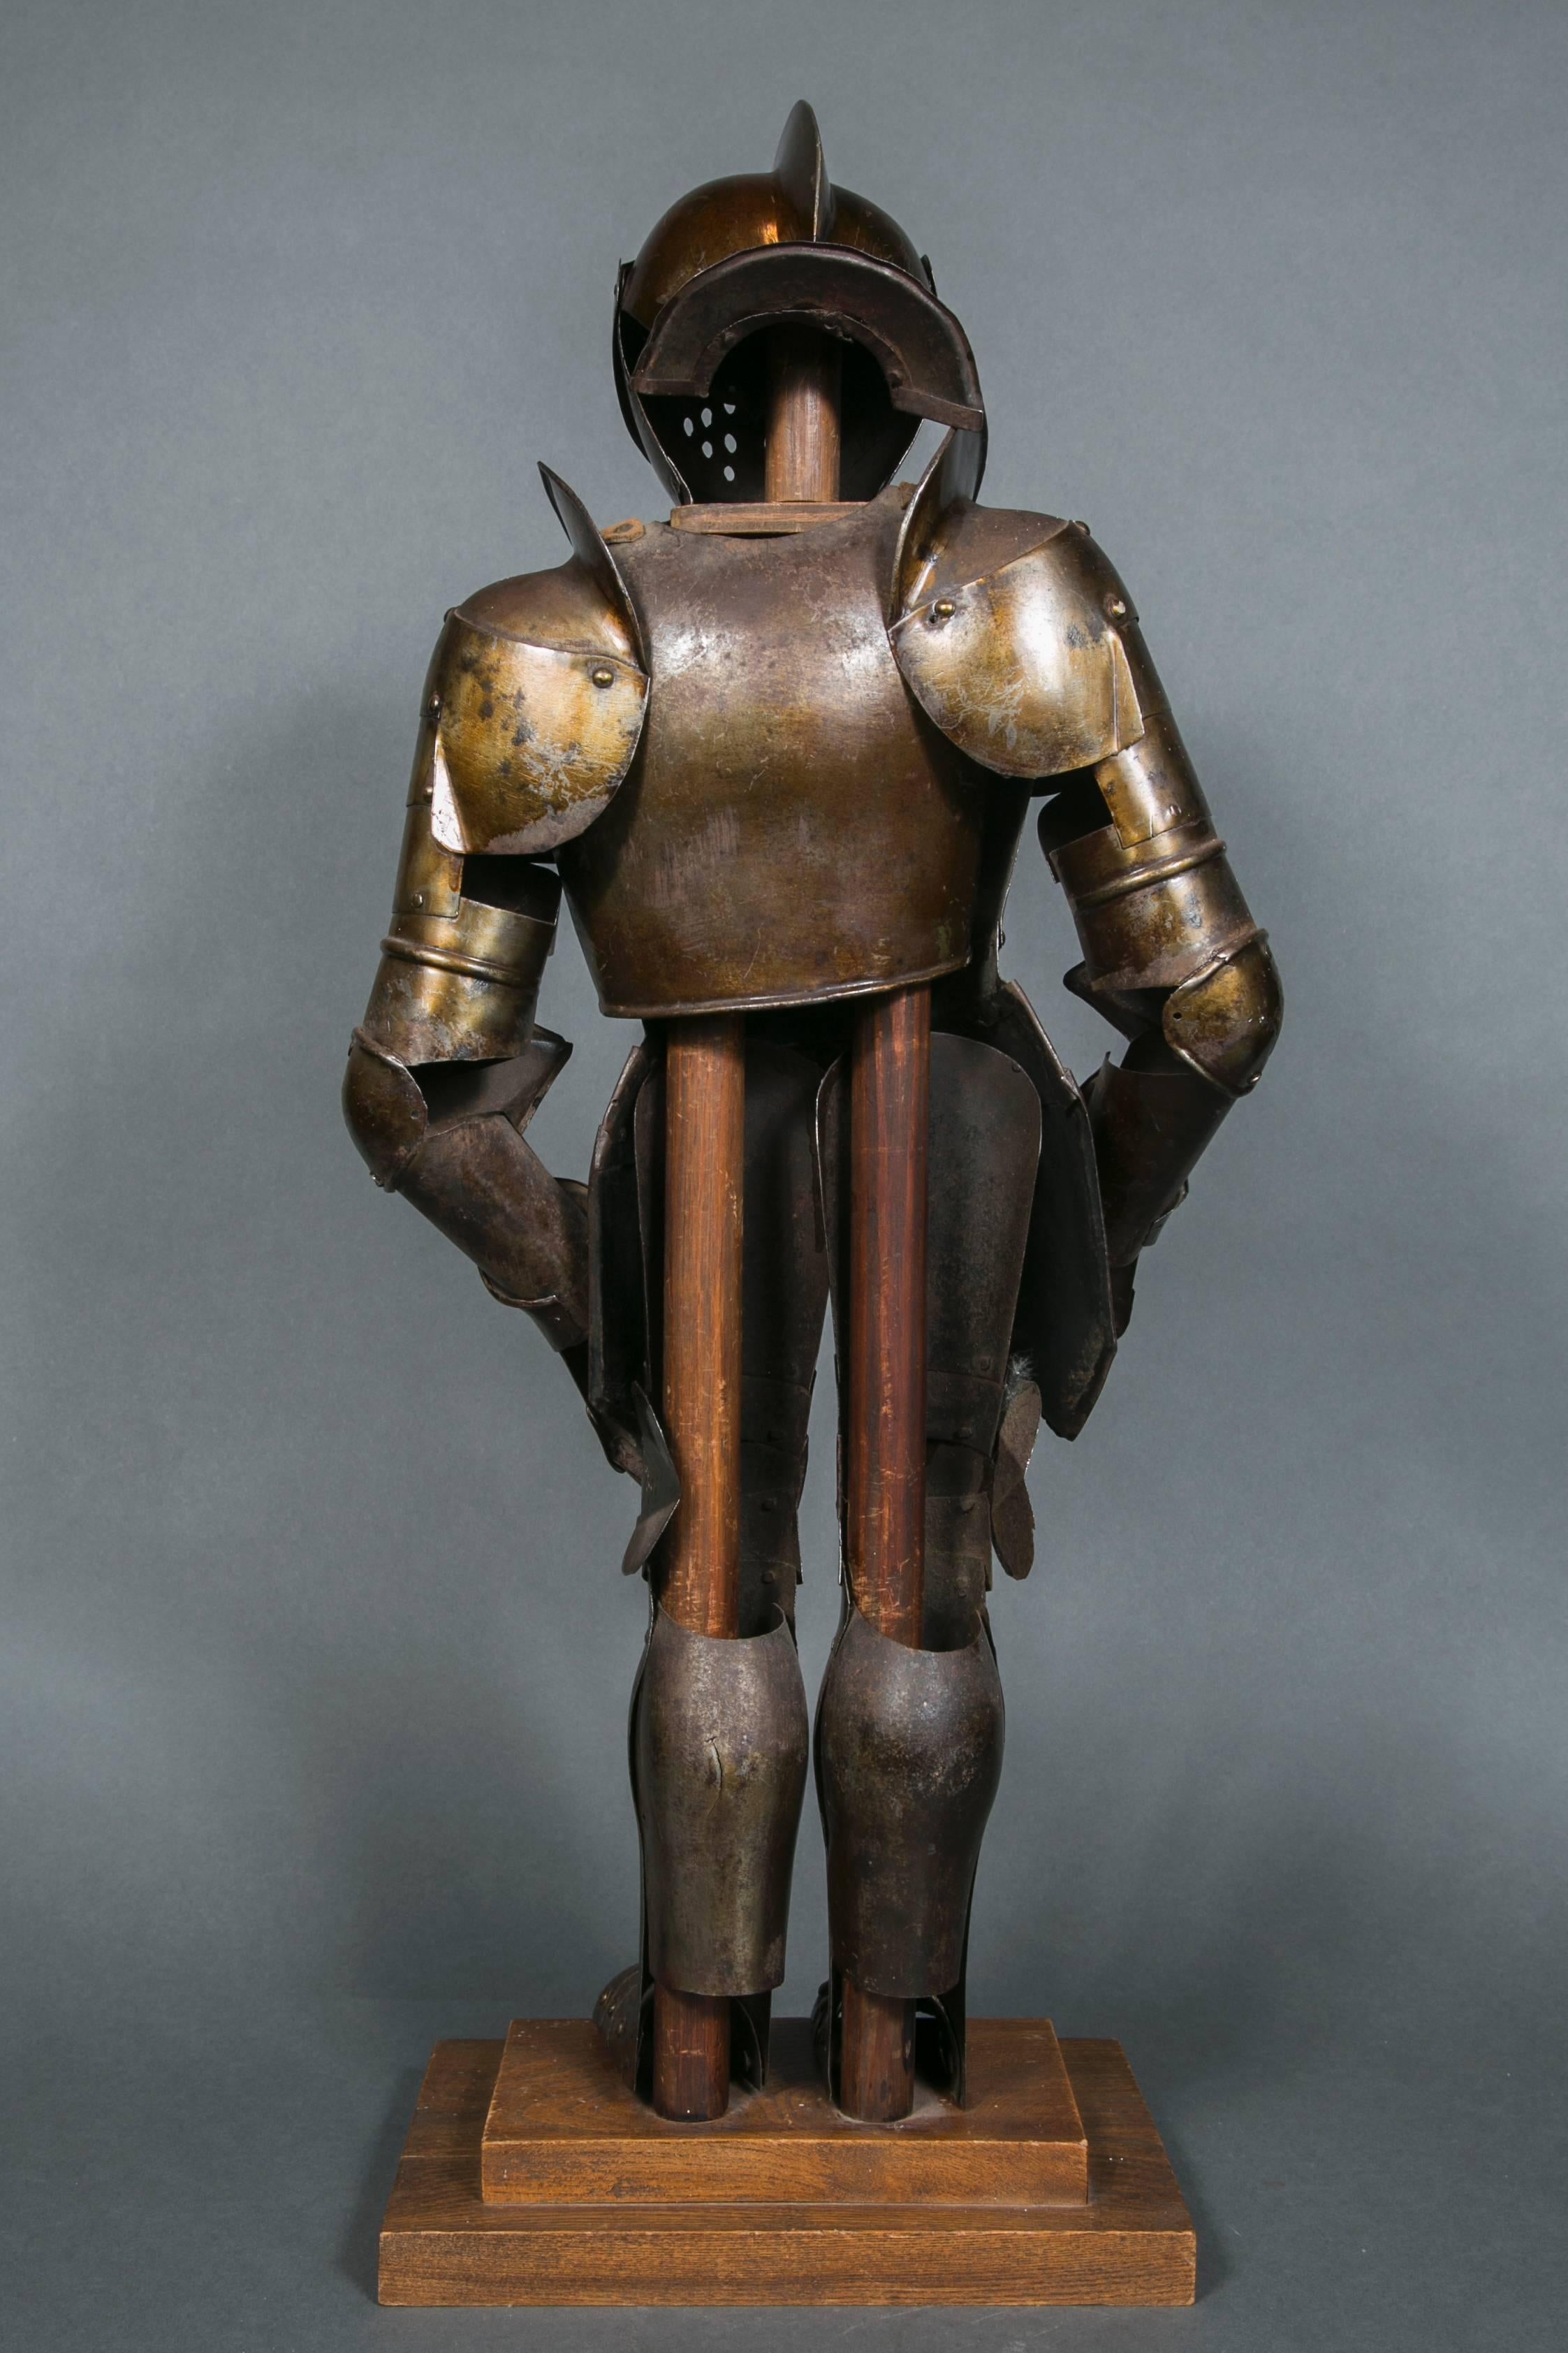 19th Century Miniature Medieval Armor in the Spirit of Viollet Le Duc